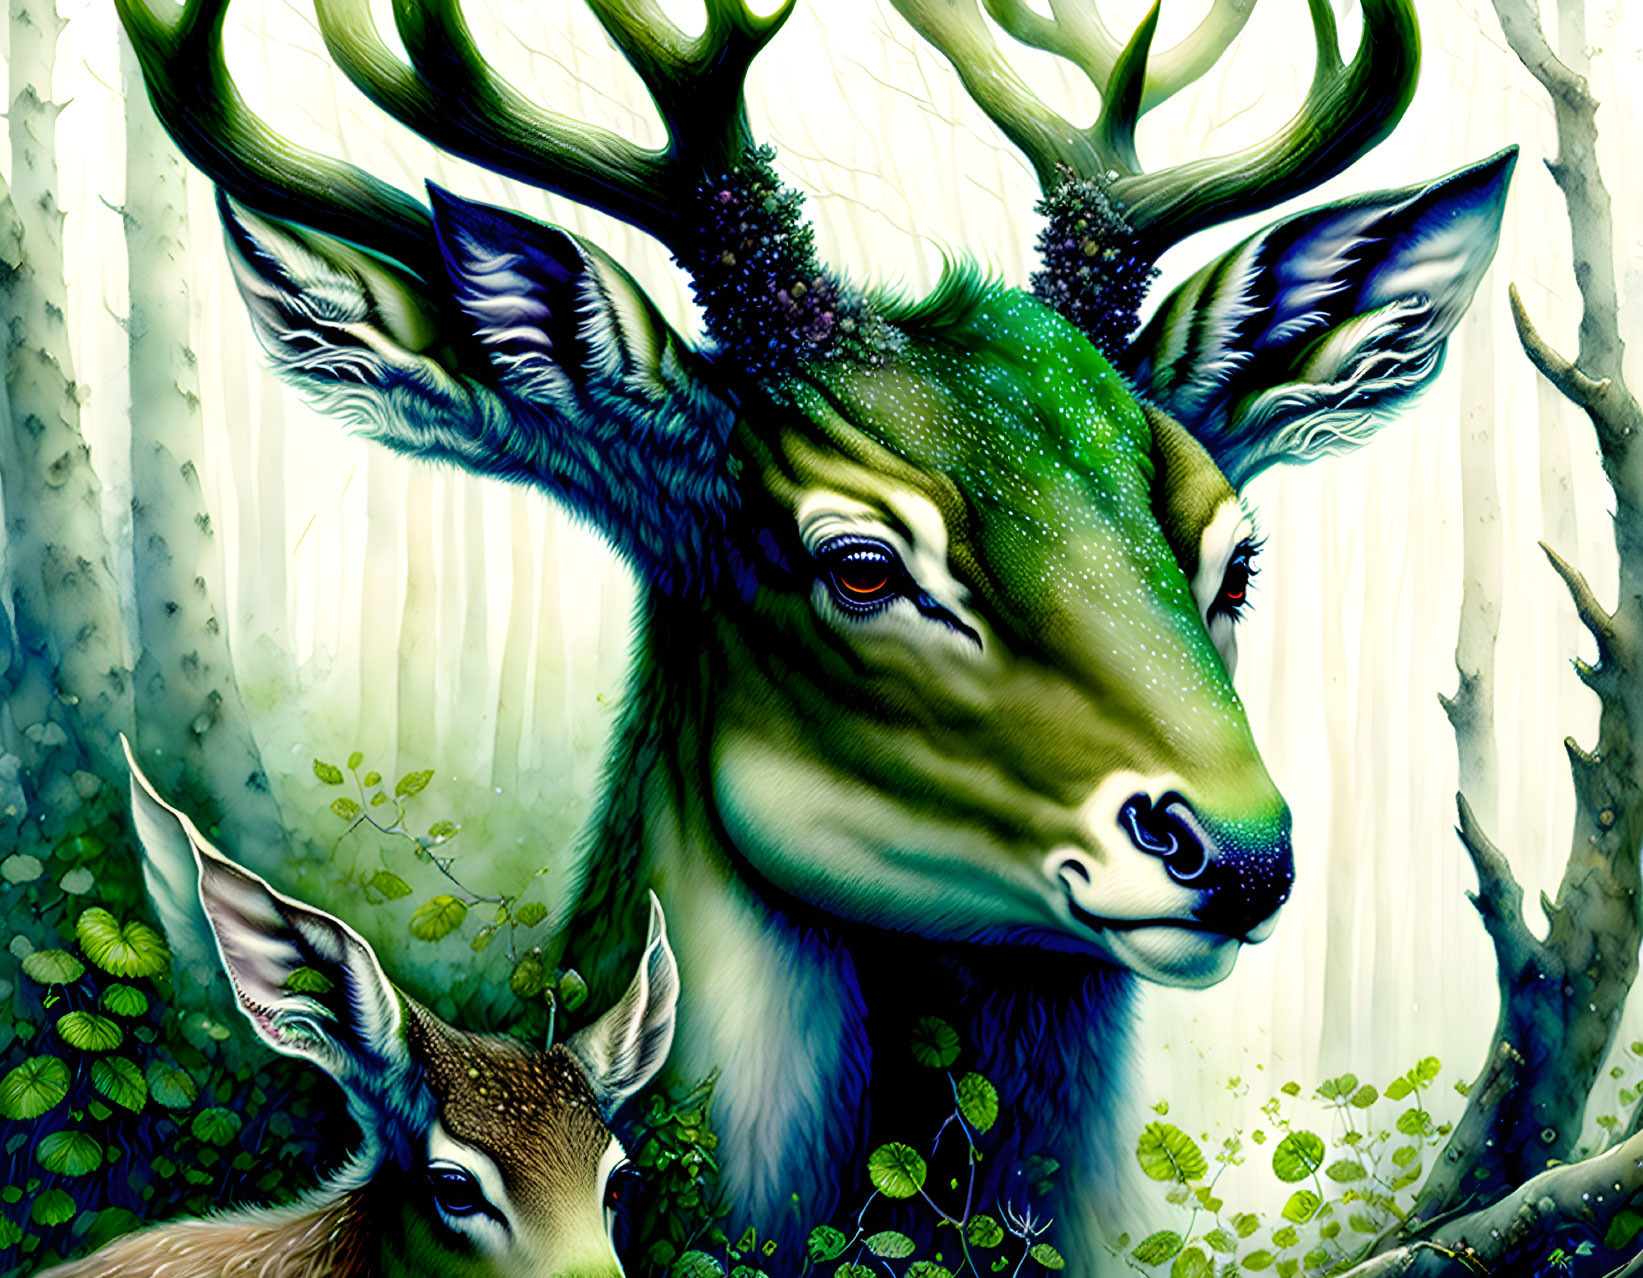 The Alien and The Deer by Dana 